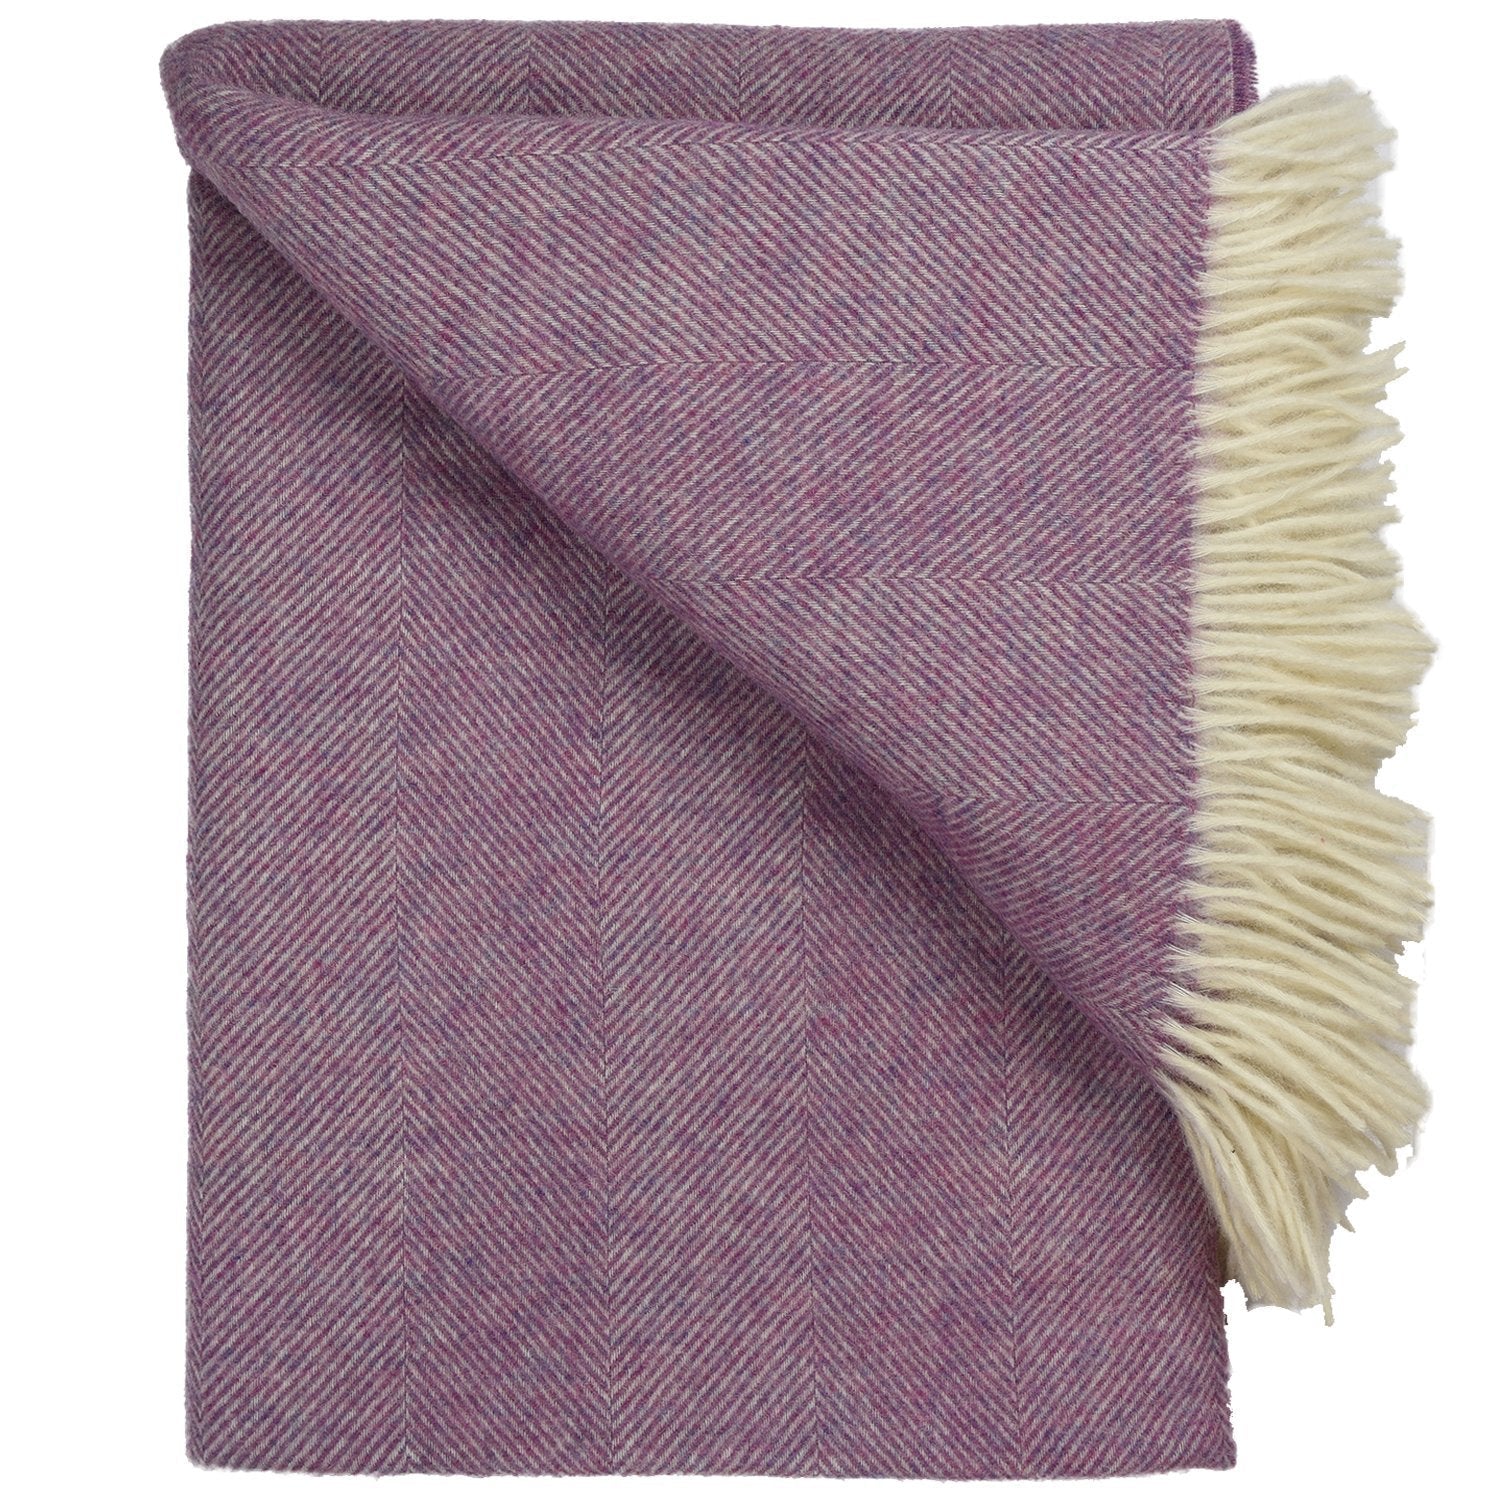 Southampton Home Wool Herringbone Throw (Petal Pink)-Throws and Blankets-Prince of Scots-810032750961-Q028001-08-Prince of Scots